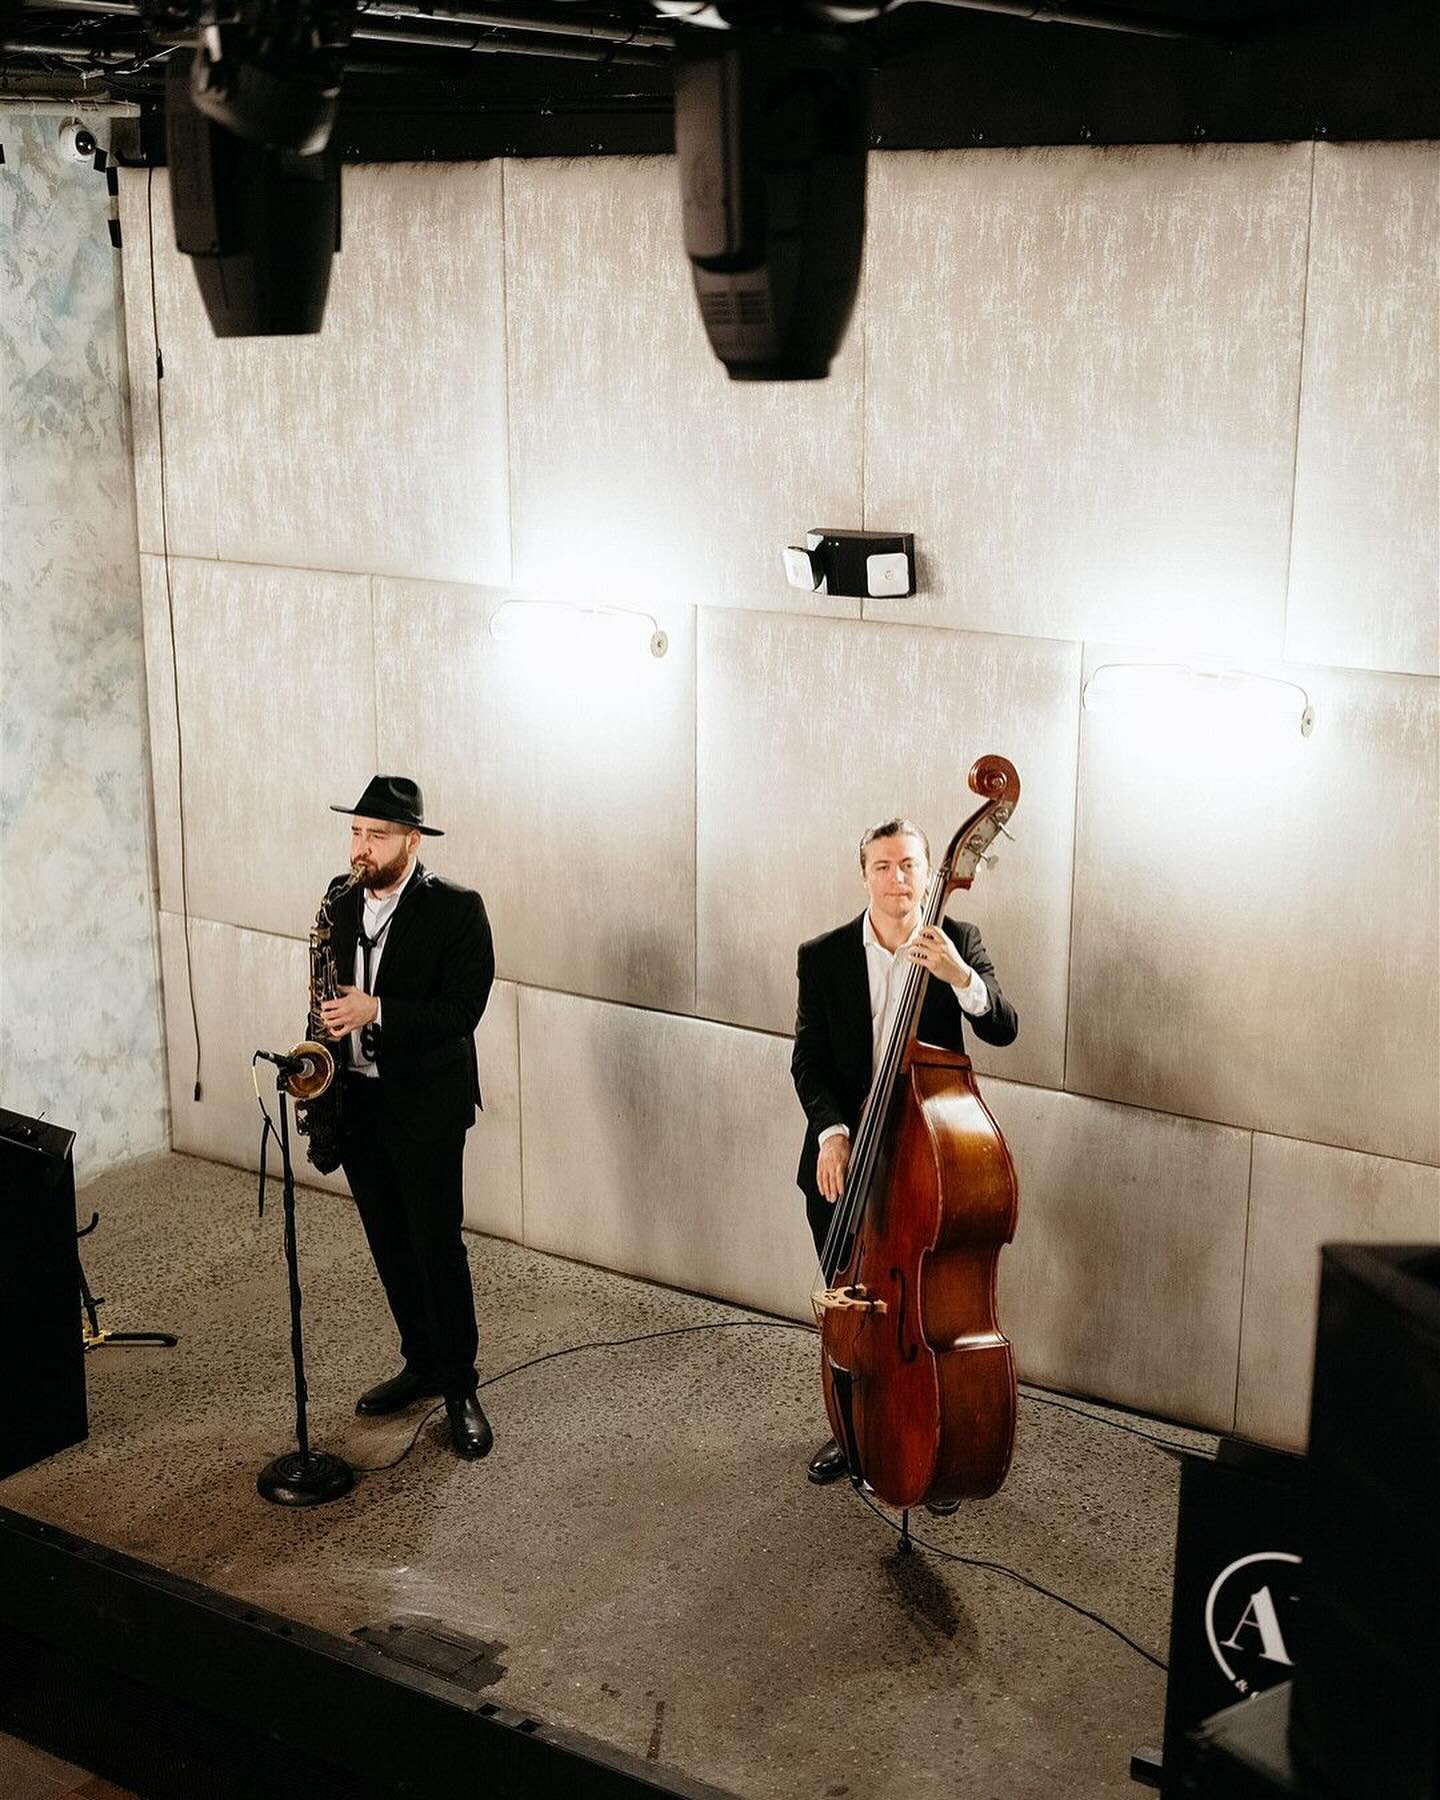 Last year we got to be a part of a really fun wedding with the best team thanks to @blossomeventsnyc ❤️

Bringing our DJ &amp; Sax combo for the reception along with a jazz trio for cocktail hour allowed to combine everything we love about music and 